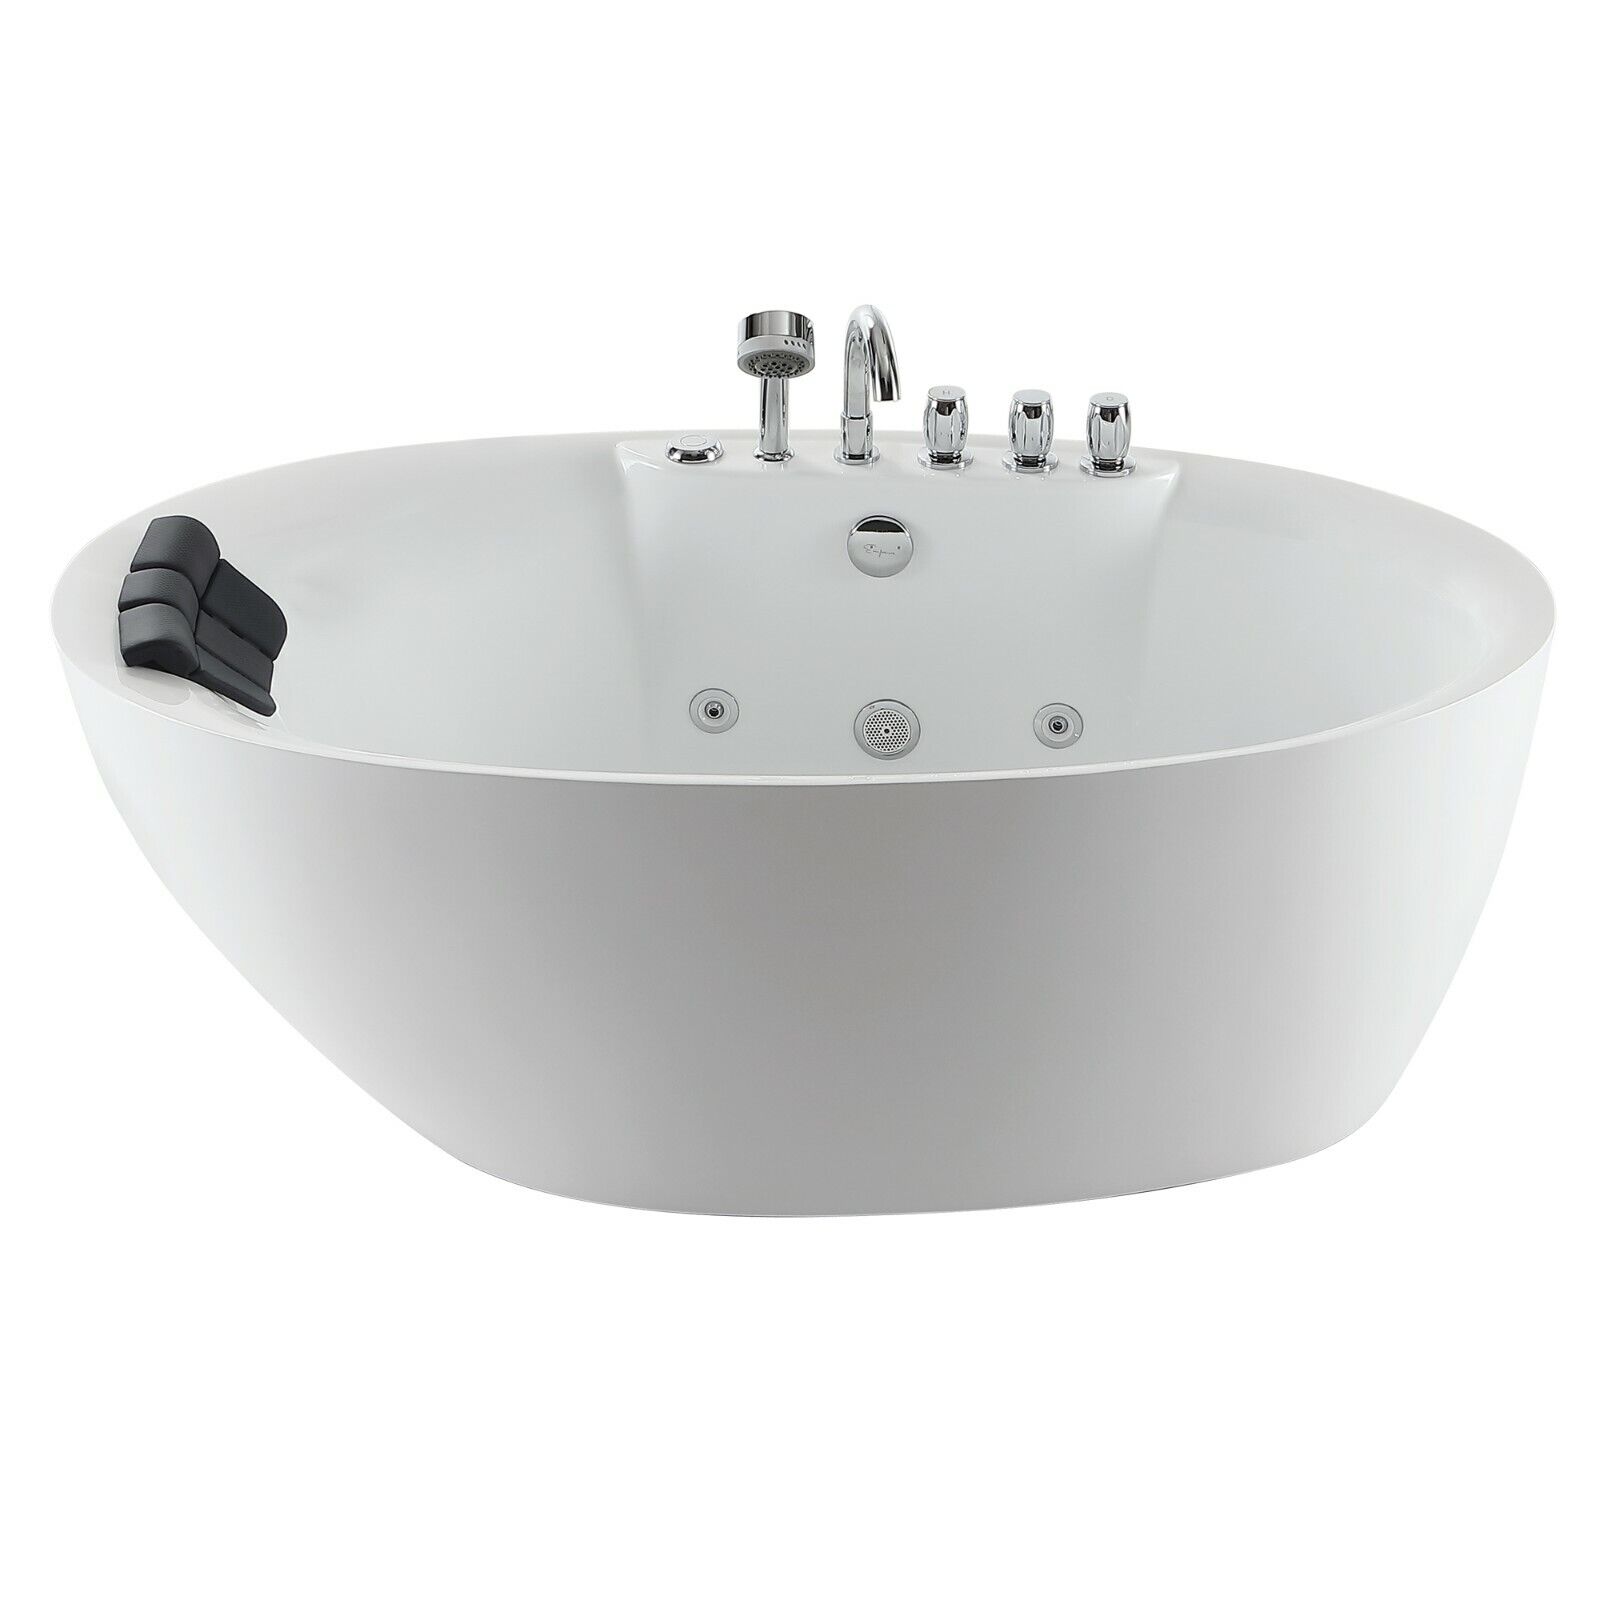 71-in L X 33.8-in W White Acrylic Center Drain Freestanding Whirlpool Tub